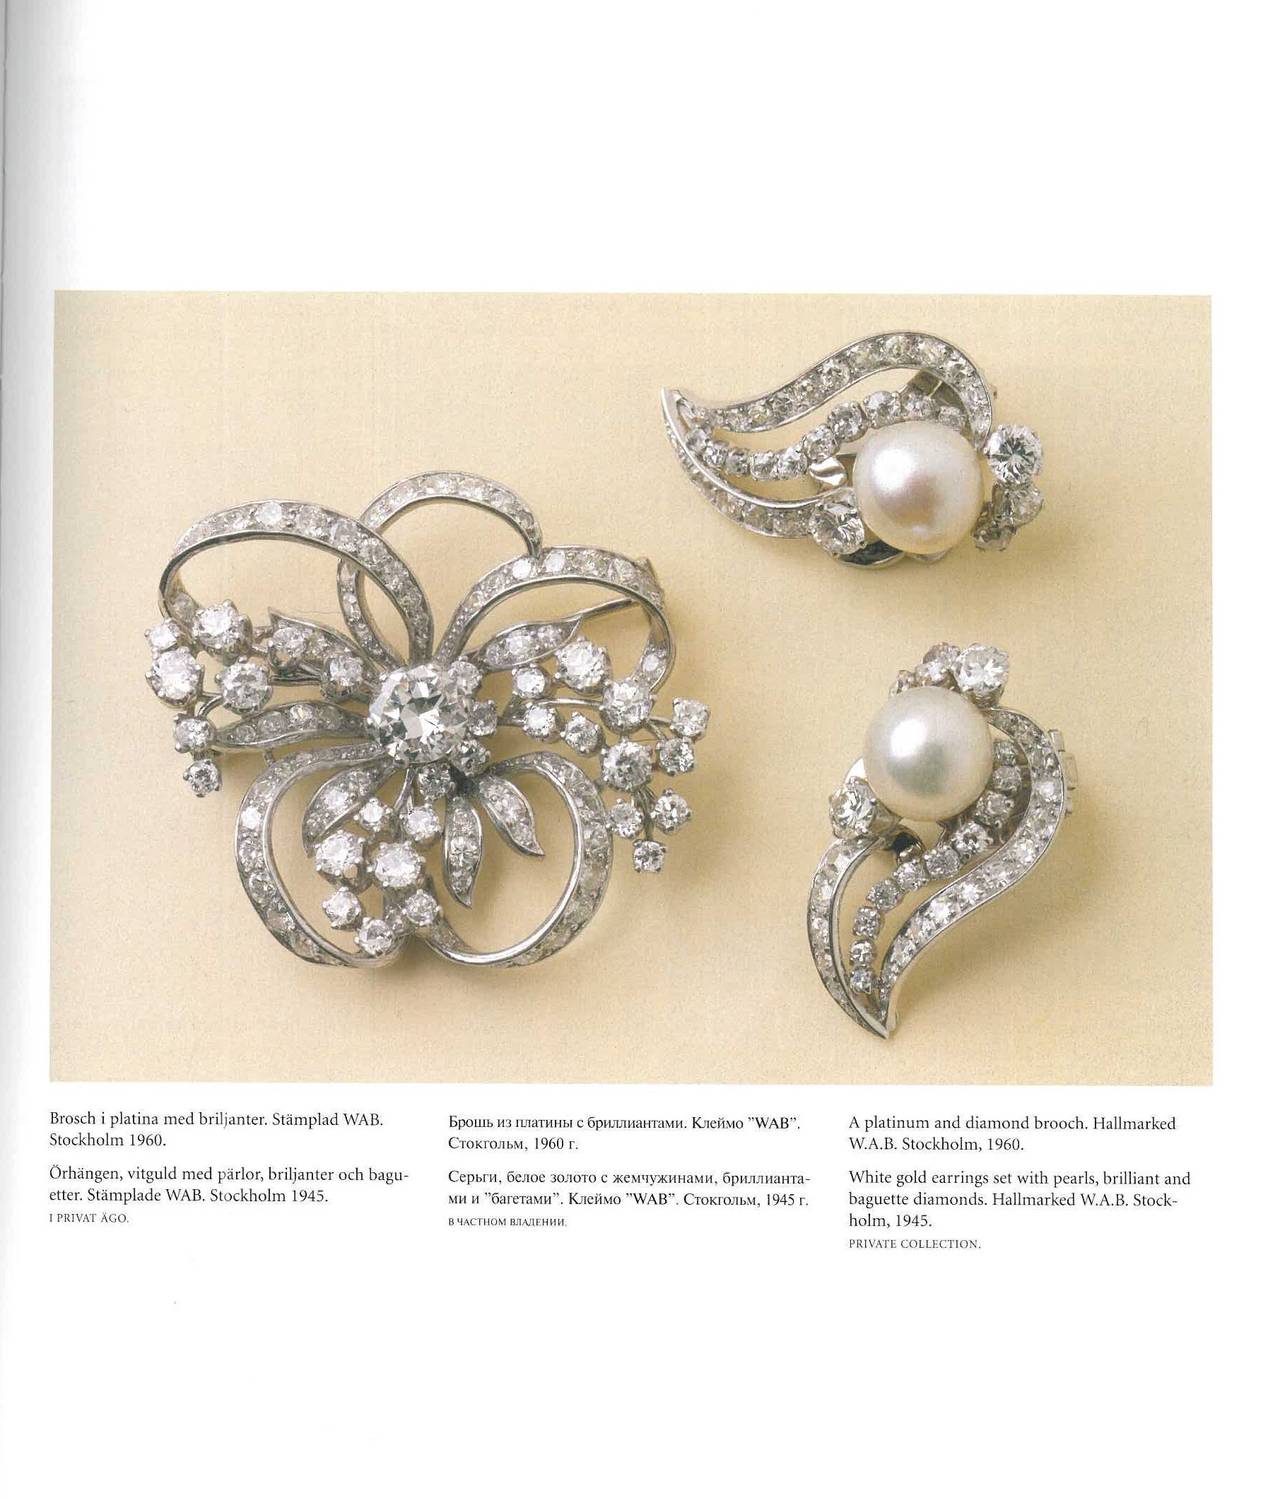 Book of W.A.Bolin Jewelry and Silver for Tsars Queens and Others 1